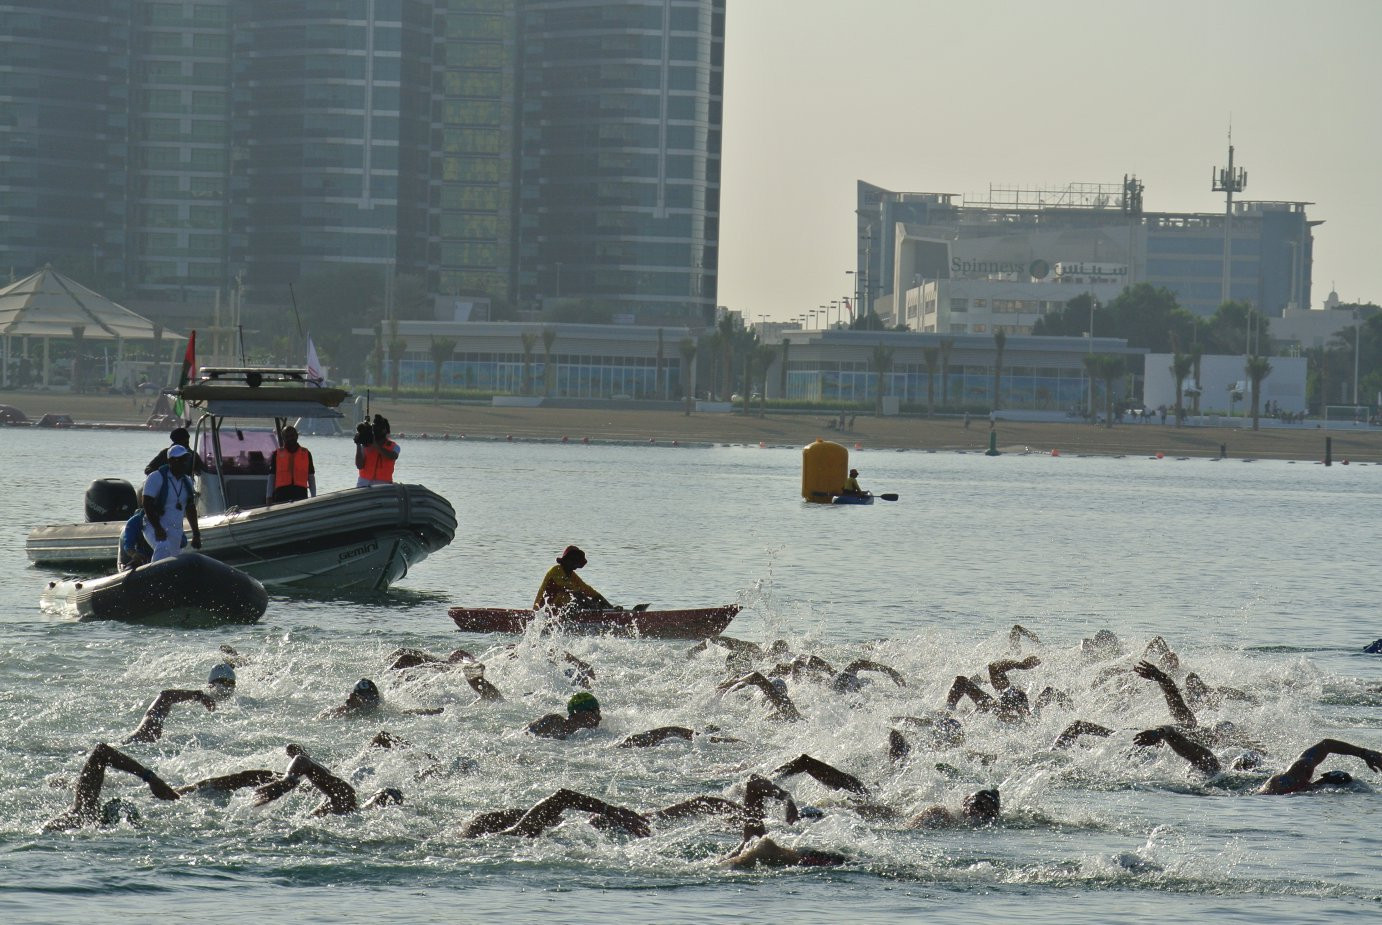 Arianna Bridi of Italy was women's winner on the day in the FNA Marathon Swim World Series race at Abu Dhabi, with Brazil's Ana Marcela Cunha claiming the overall title ©FINA